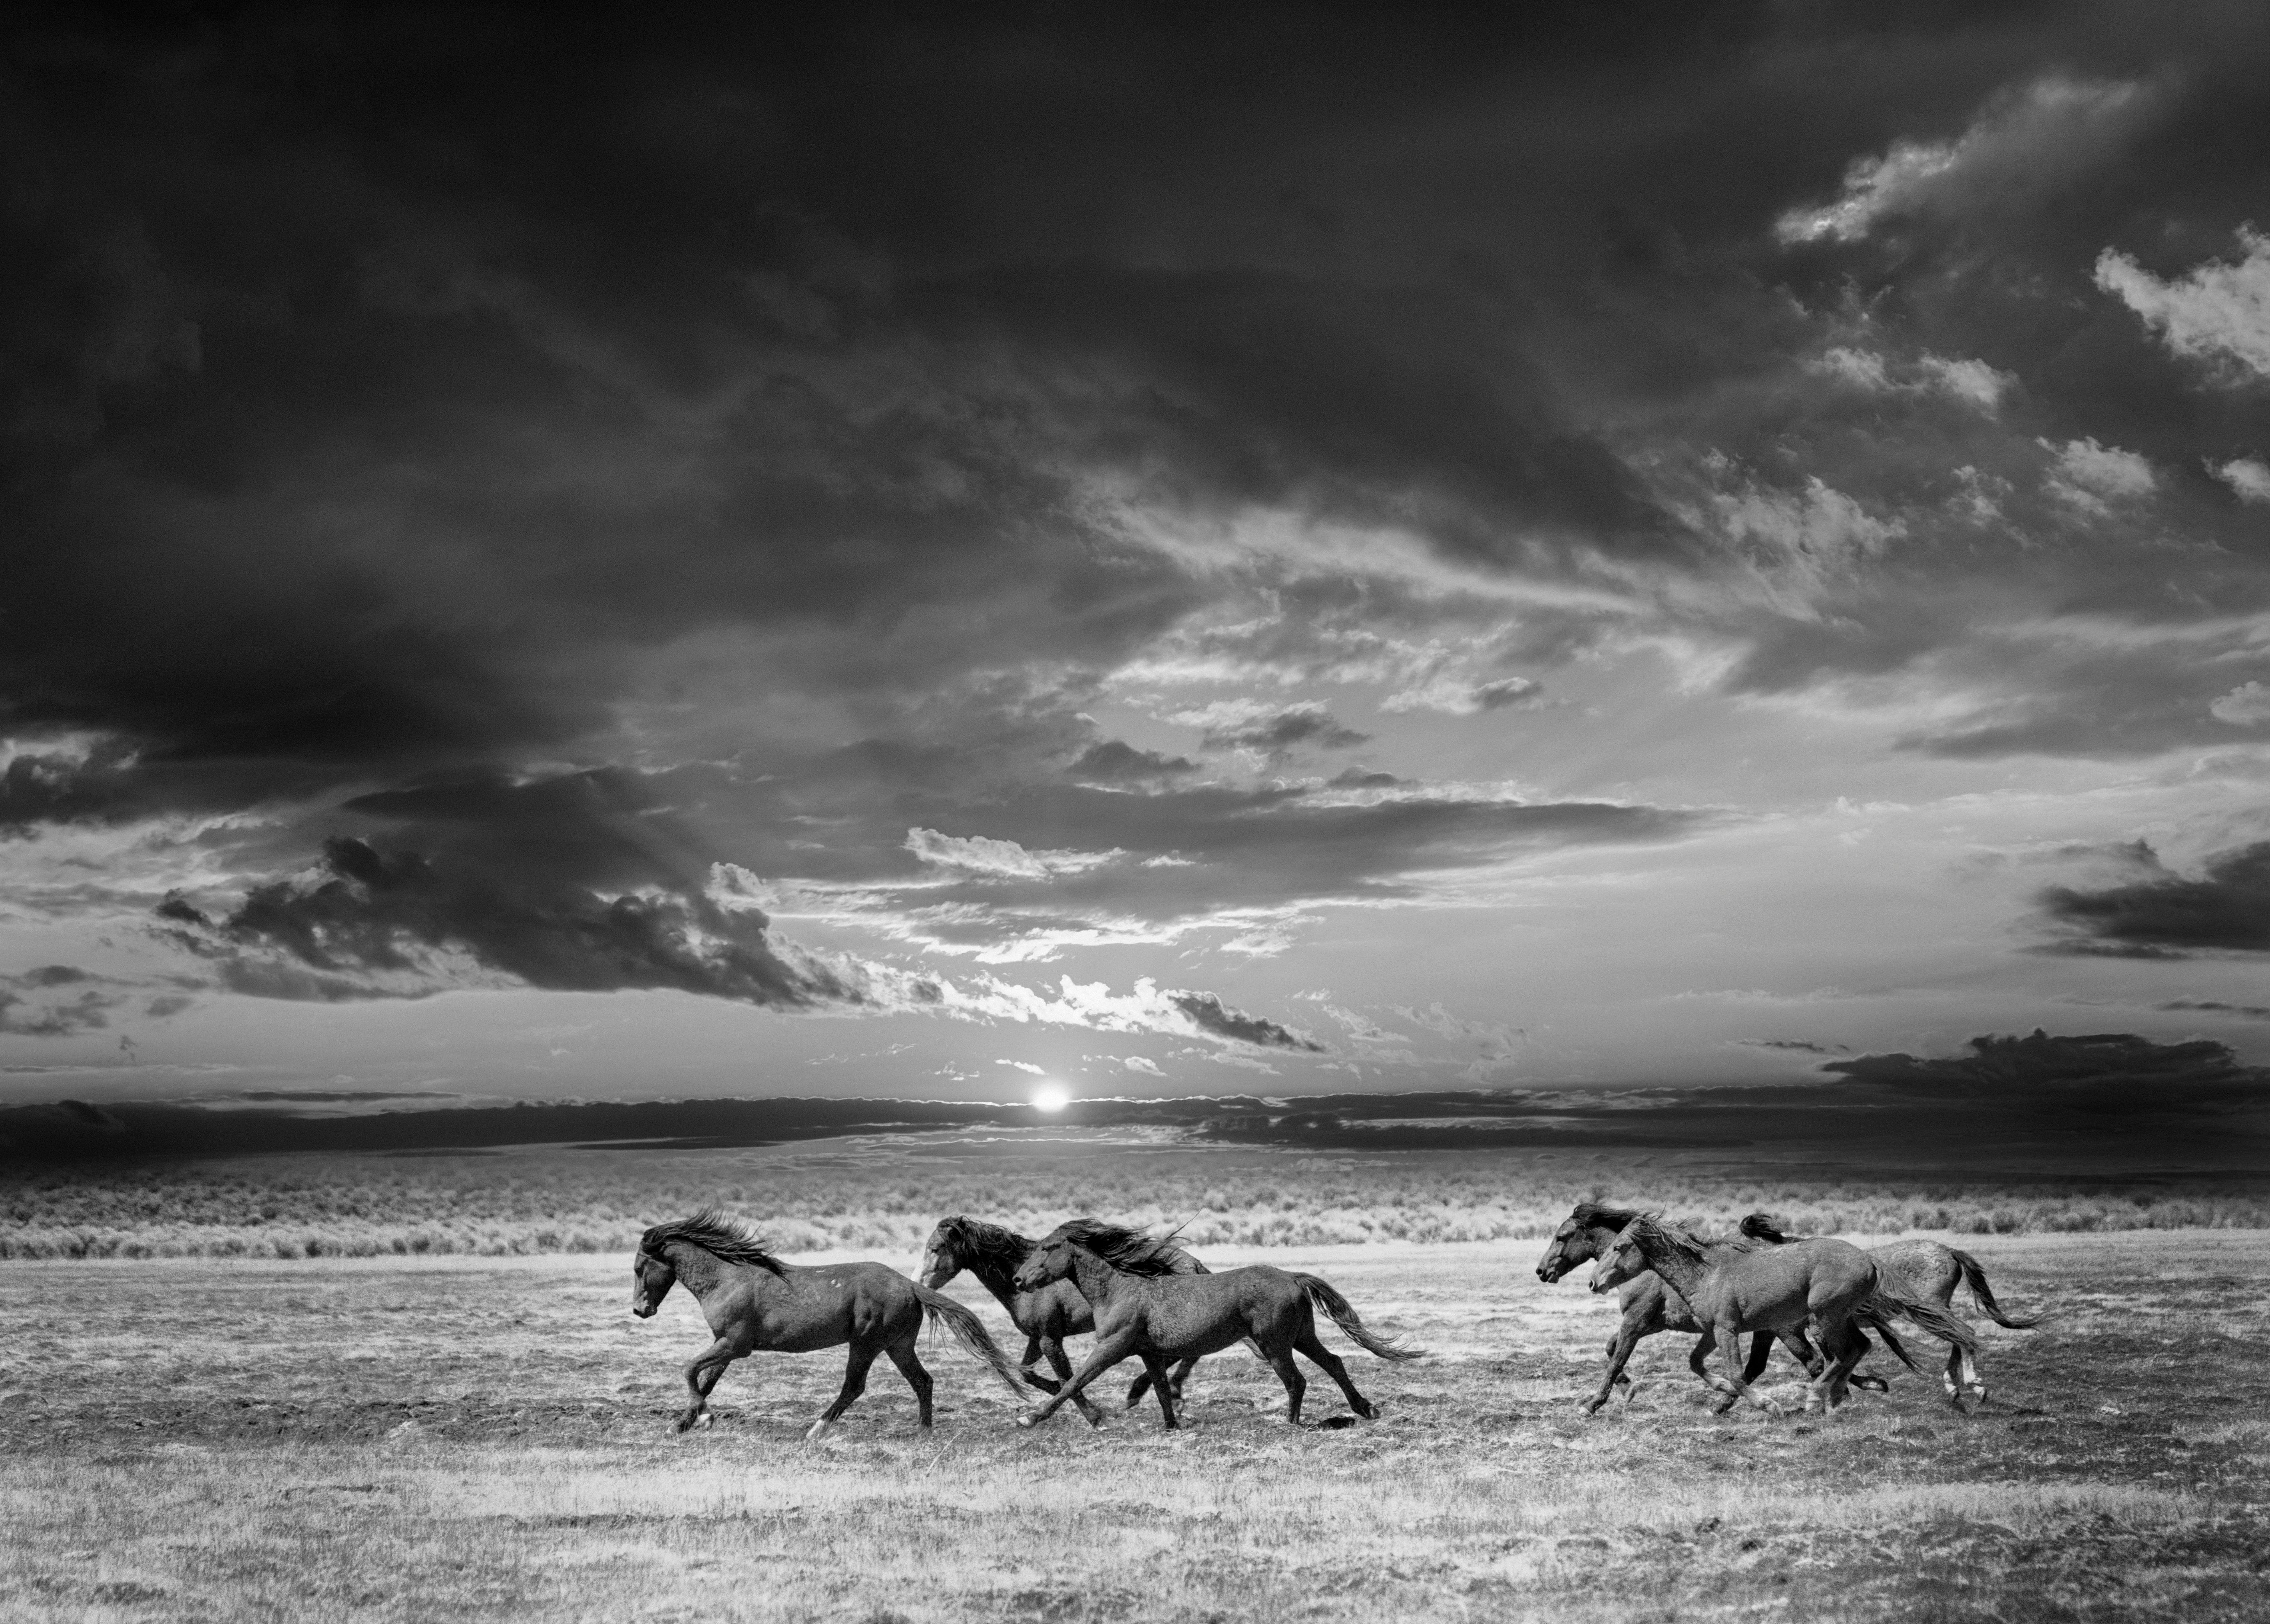 Shane Russeck Black and White Photograph -  "Chasing the Light" 40x50 Photography Wild Horses Mustangs Photograph Fine Art